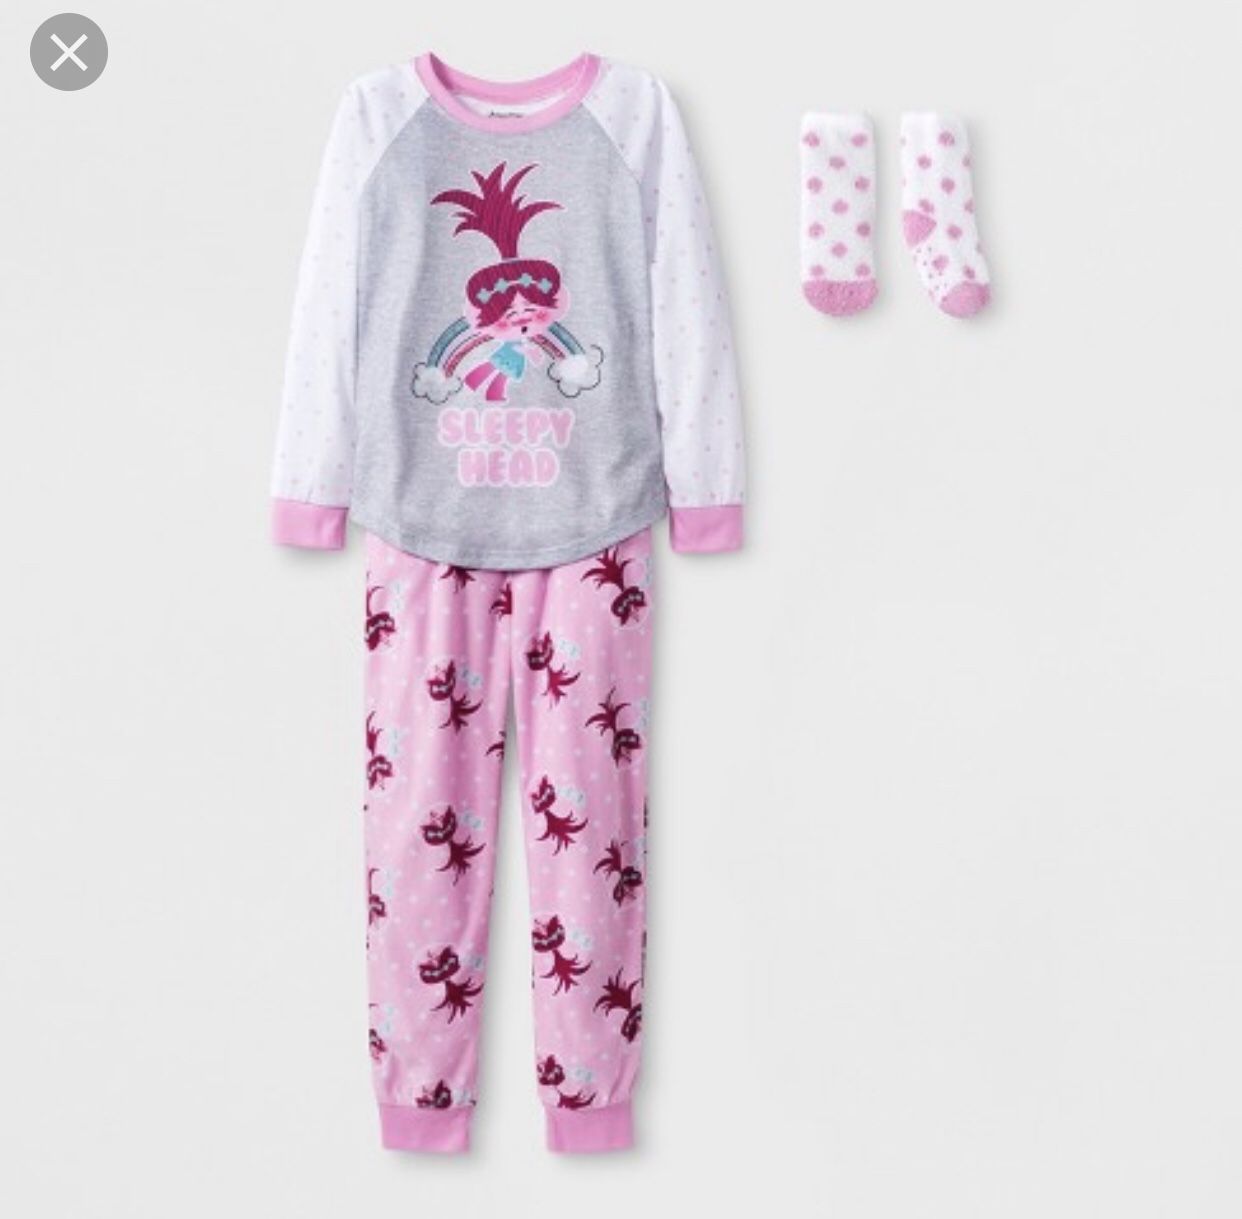 New with Tags Trolls Girls Pajamas, Size Medium - Retails for $16.99